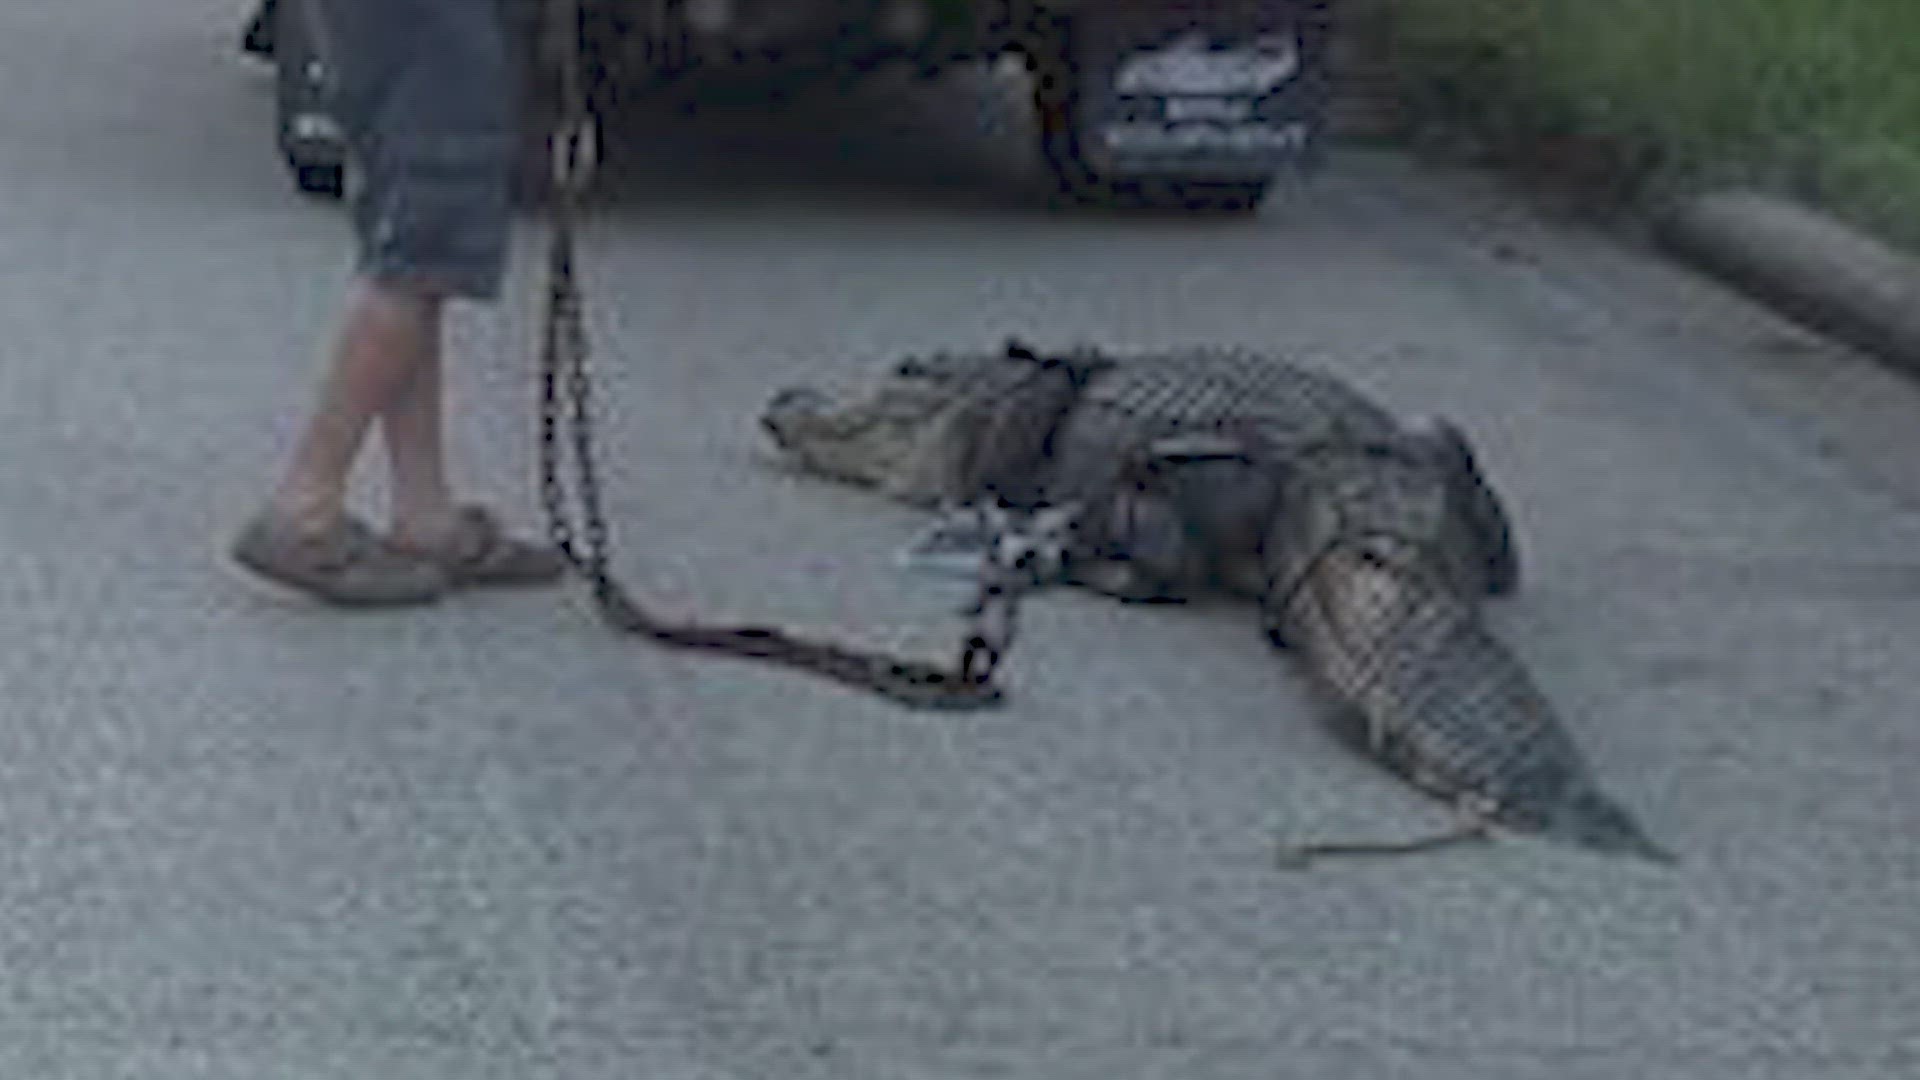 A massive 10-foot-long alligator caused a traffic jam on Tuesday after taking a stroll on the Beltway.